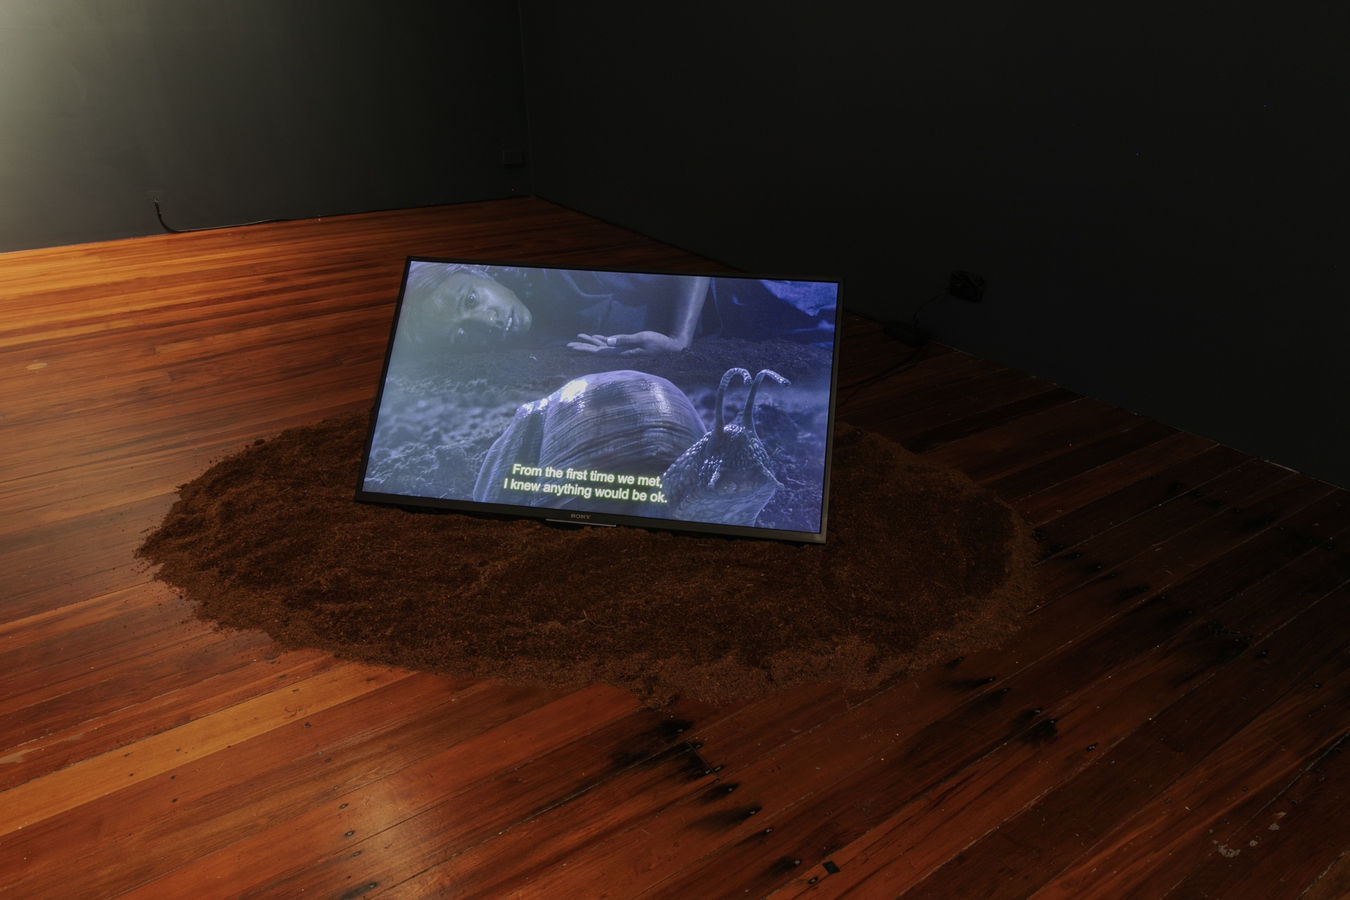 Image: Akil Ahamat, Dawn of a day too dark to call tomorrow (installation view), 2021. Photo by Nancy Zhou.